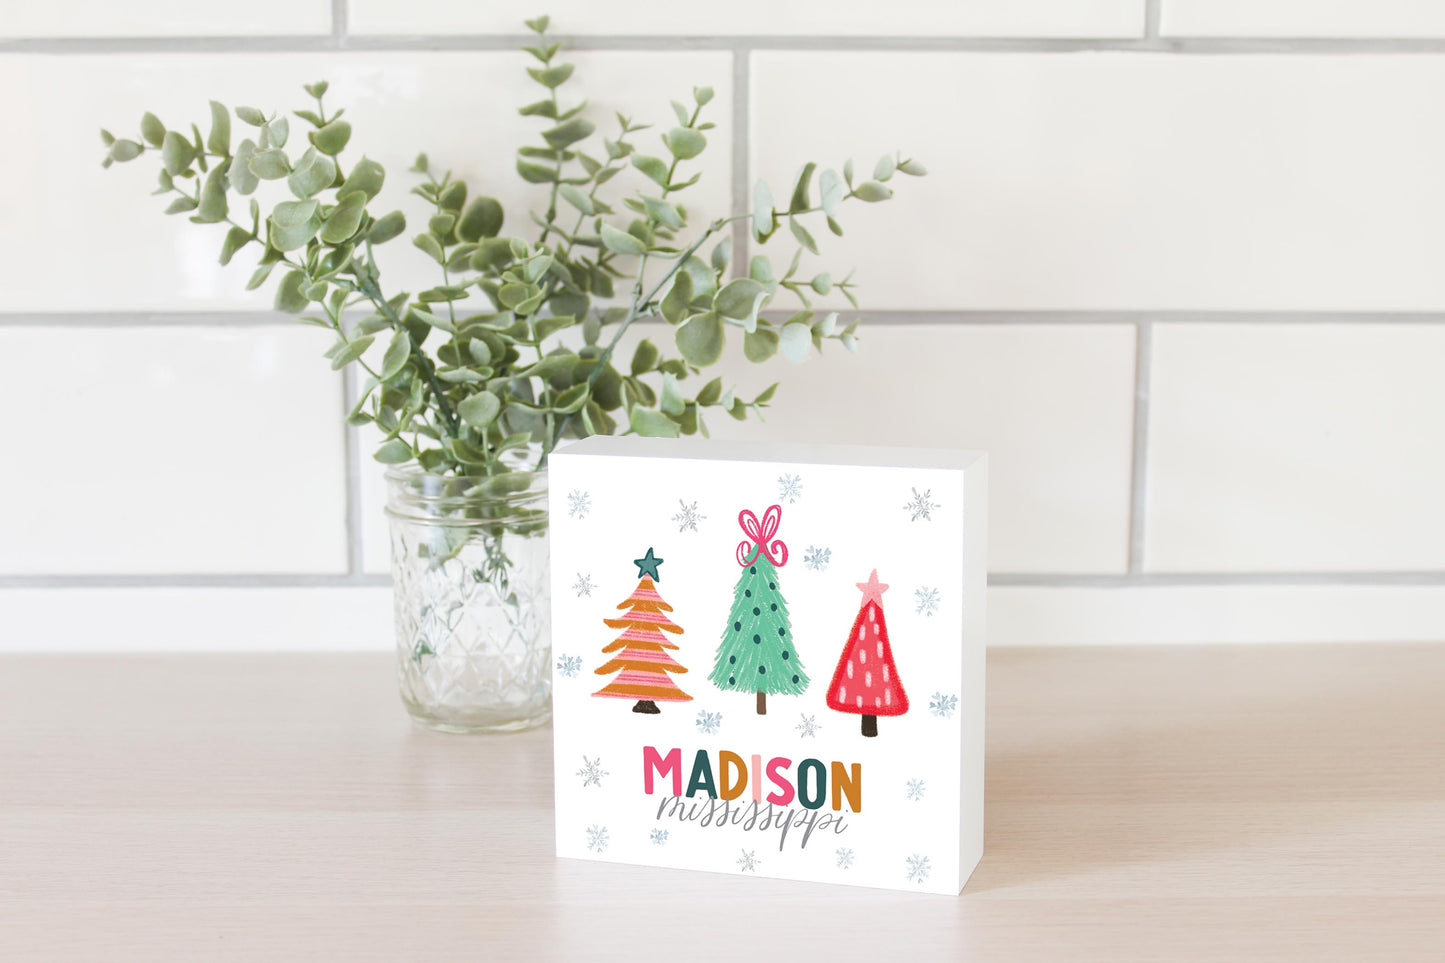 Clairmont & Co Whimsy Bright Madison MS | 5x5